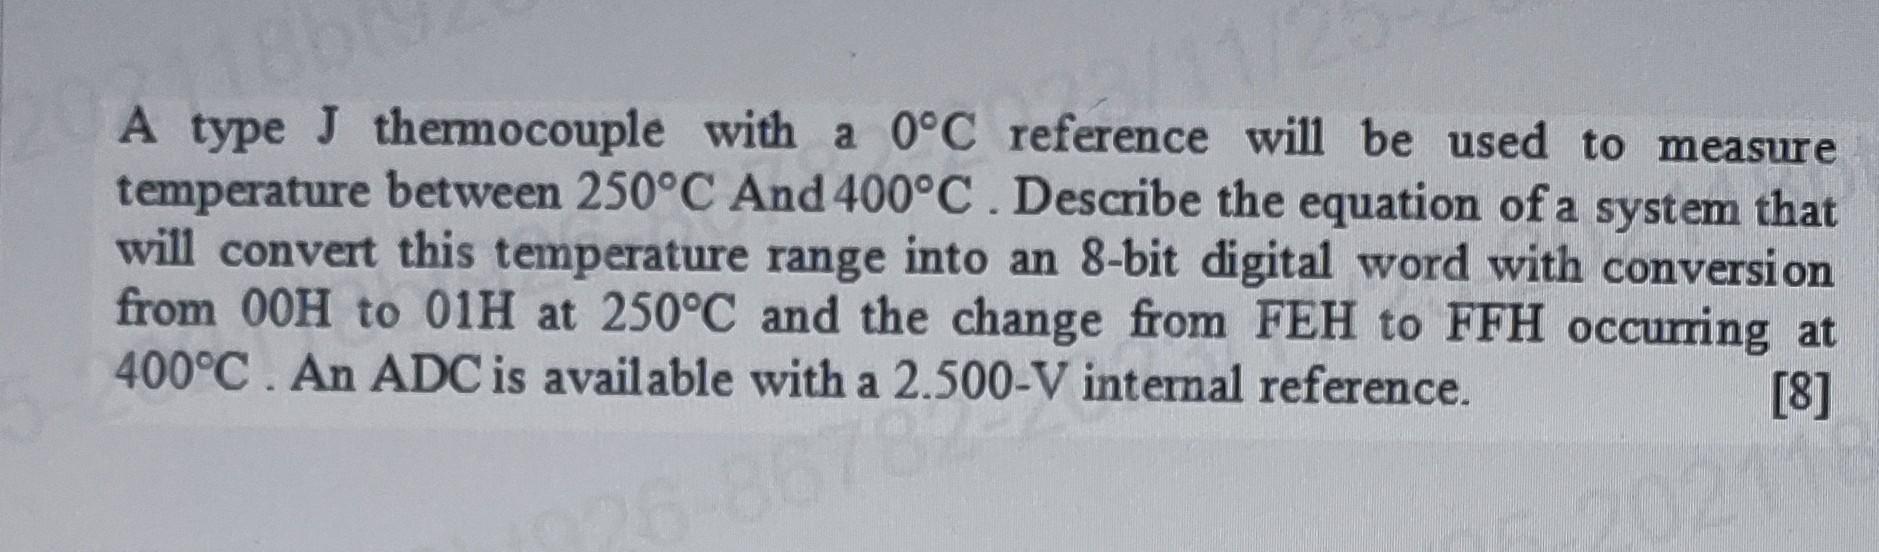 18br A type J thermocouple with a 0C reference will be used to measure temperature between 250C And 400C.